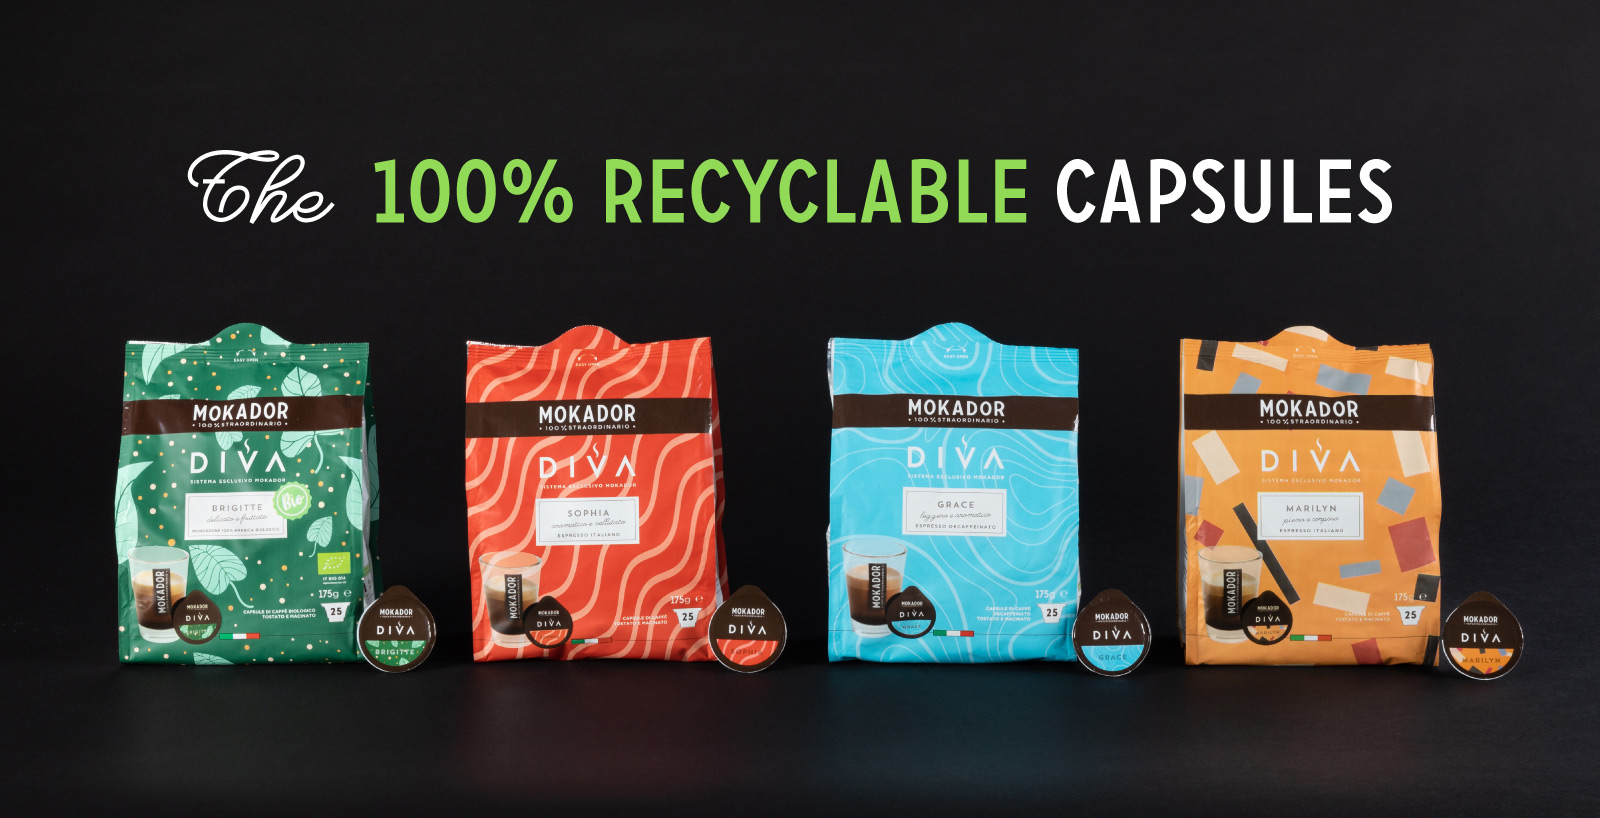 The 100% Recyclable capsules